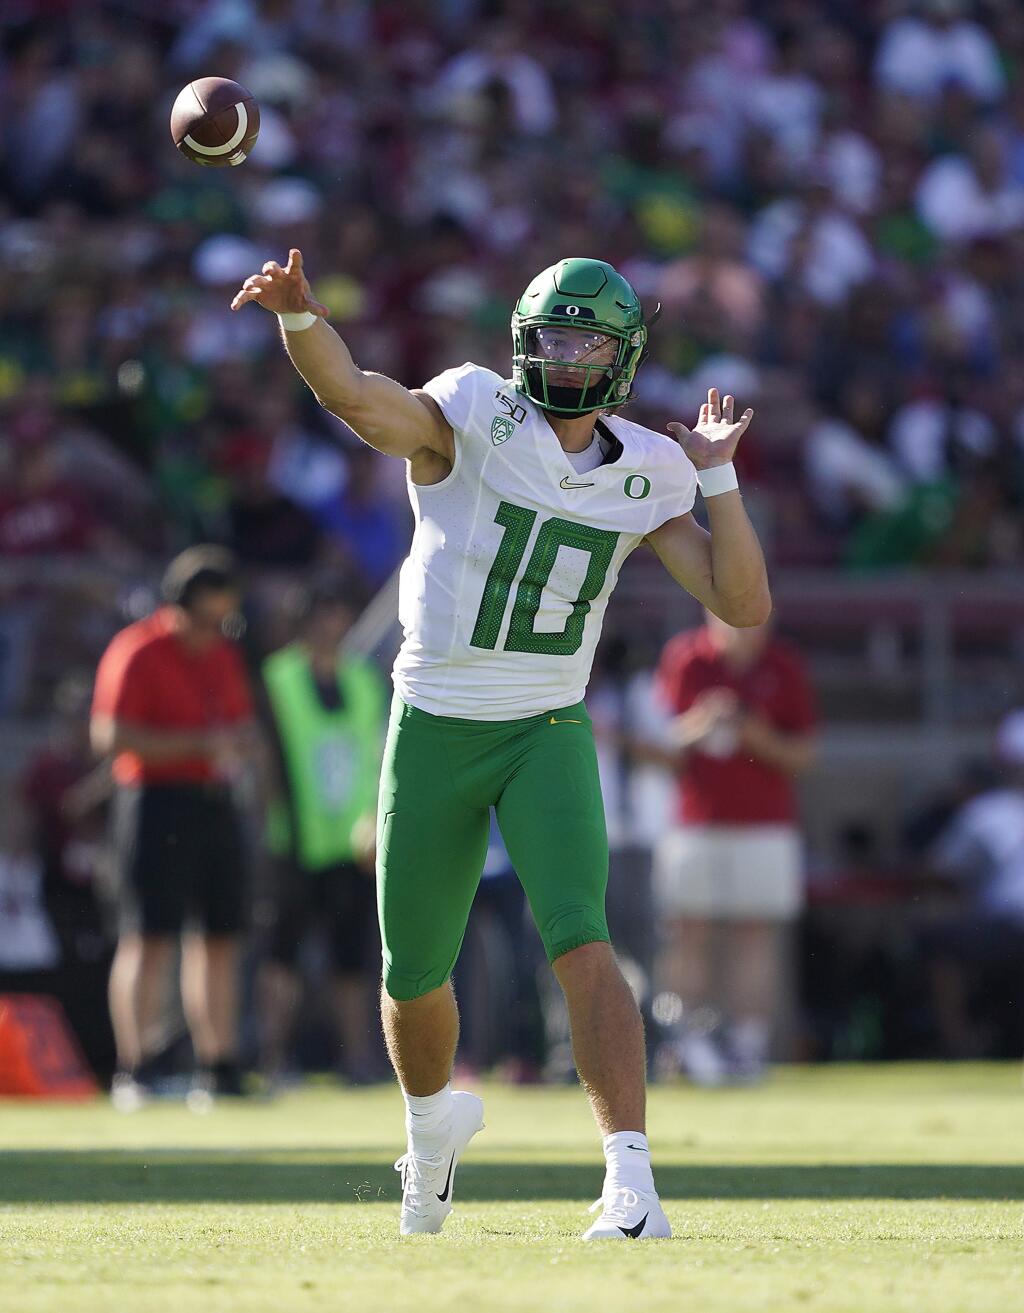 Oregon quarterback Justin Herbert (10) throws against Stanford during the first half of an NCAA college football game on Saturday, Sept. 21, 2019, in Stanford, Calif. (AP Photo/Tony Avelar)